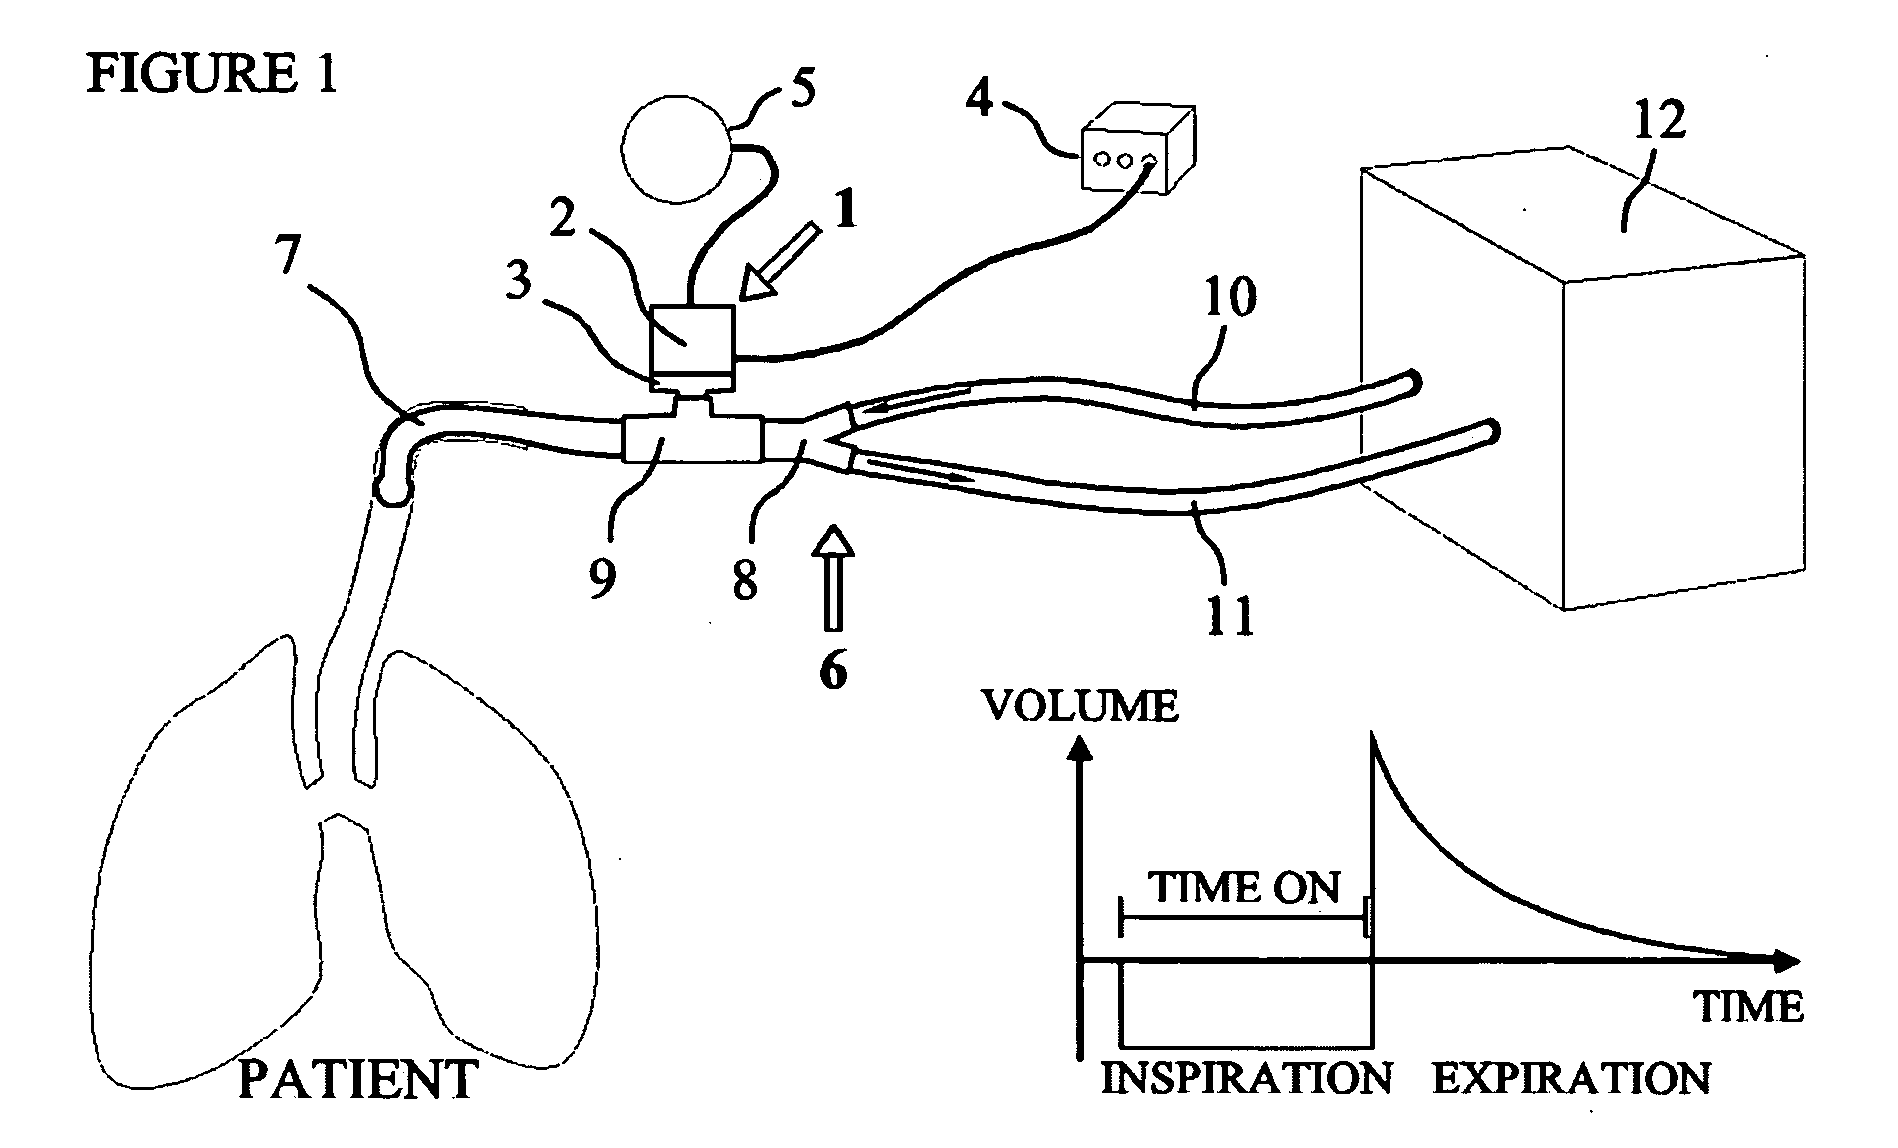 Device for delivery and regulation of volatile fluids into inspiratory gas